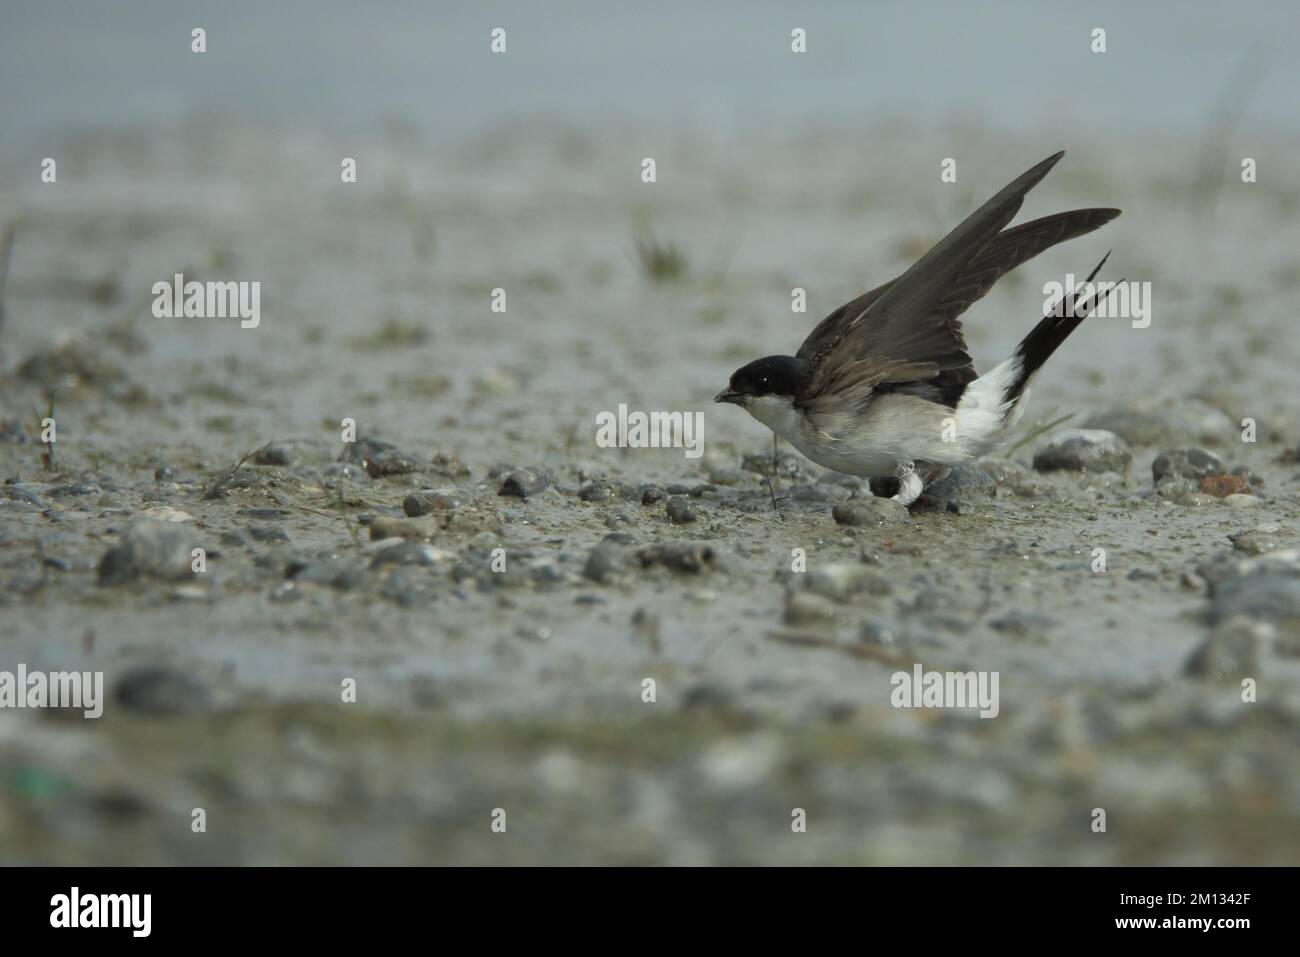 Common house martin (Delichon urbica) on the ground with wing, movement, St. Andrä, Seewinkel, Lake Neusiedl, Burgenland, Austria, Europe Stock Photo